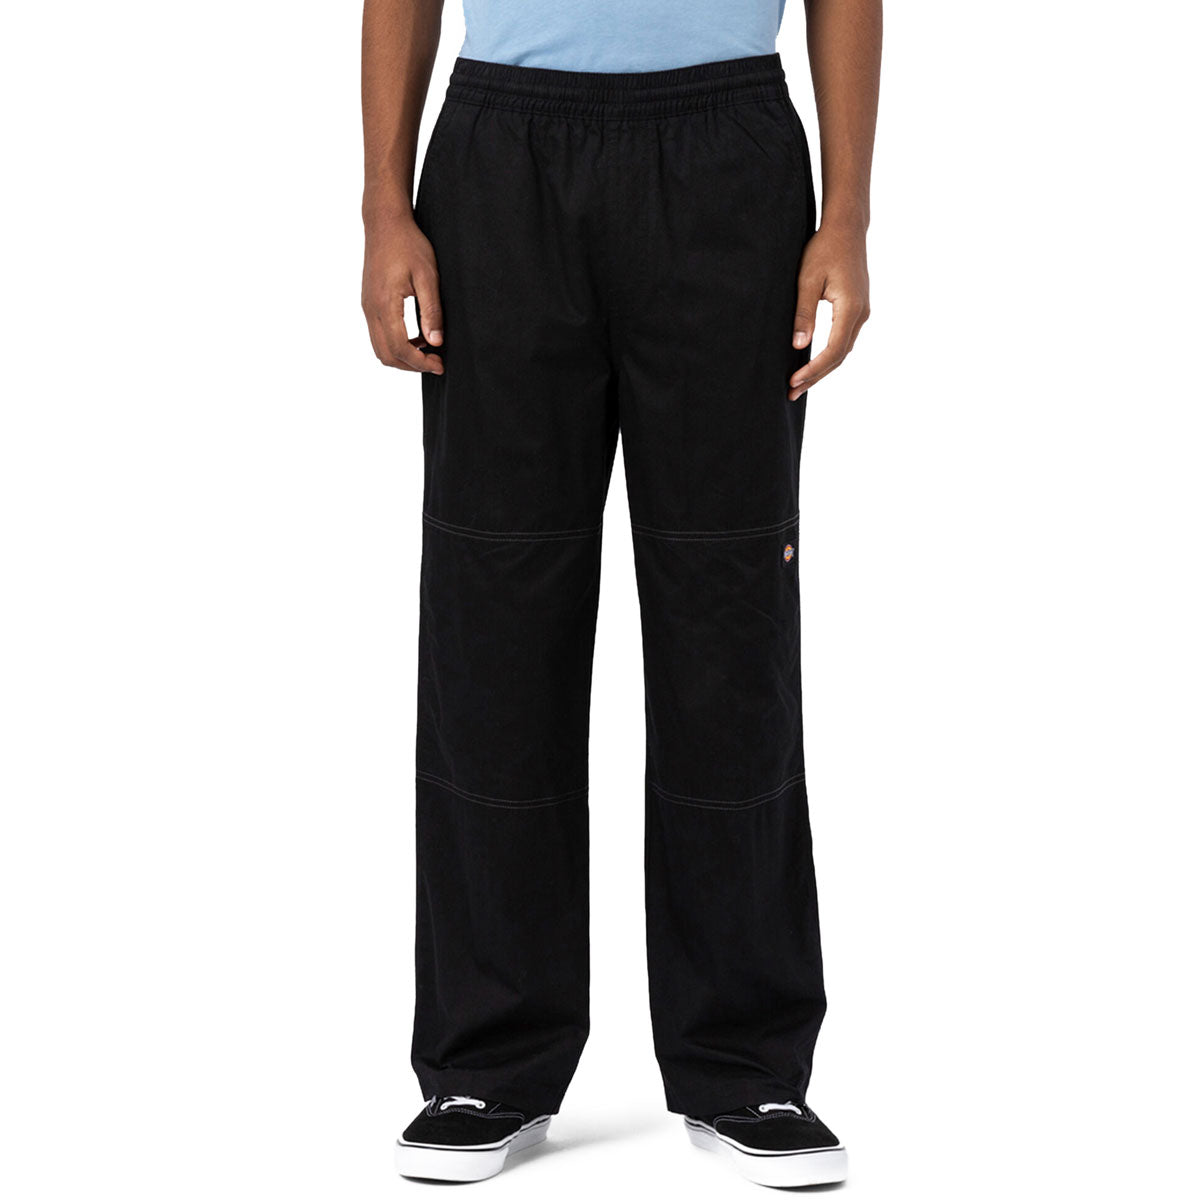 Dickies Summit Relaxed Fit Chef Pants - Black image 1